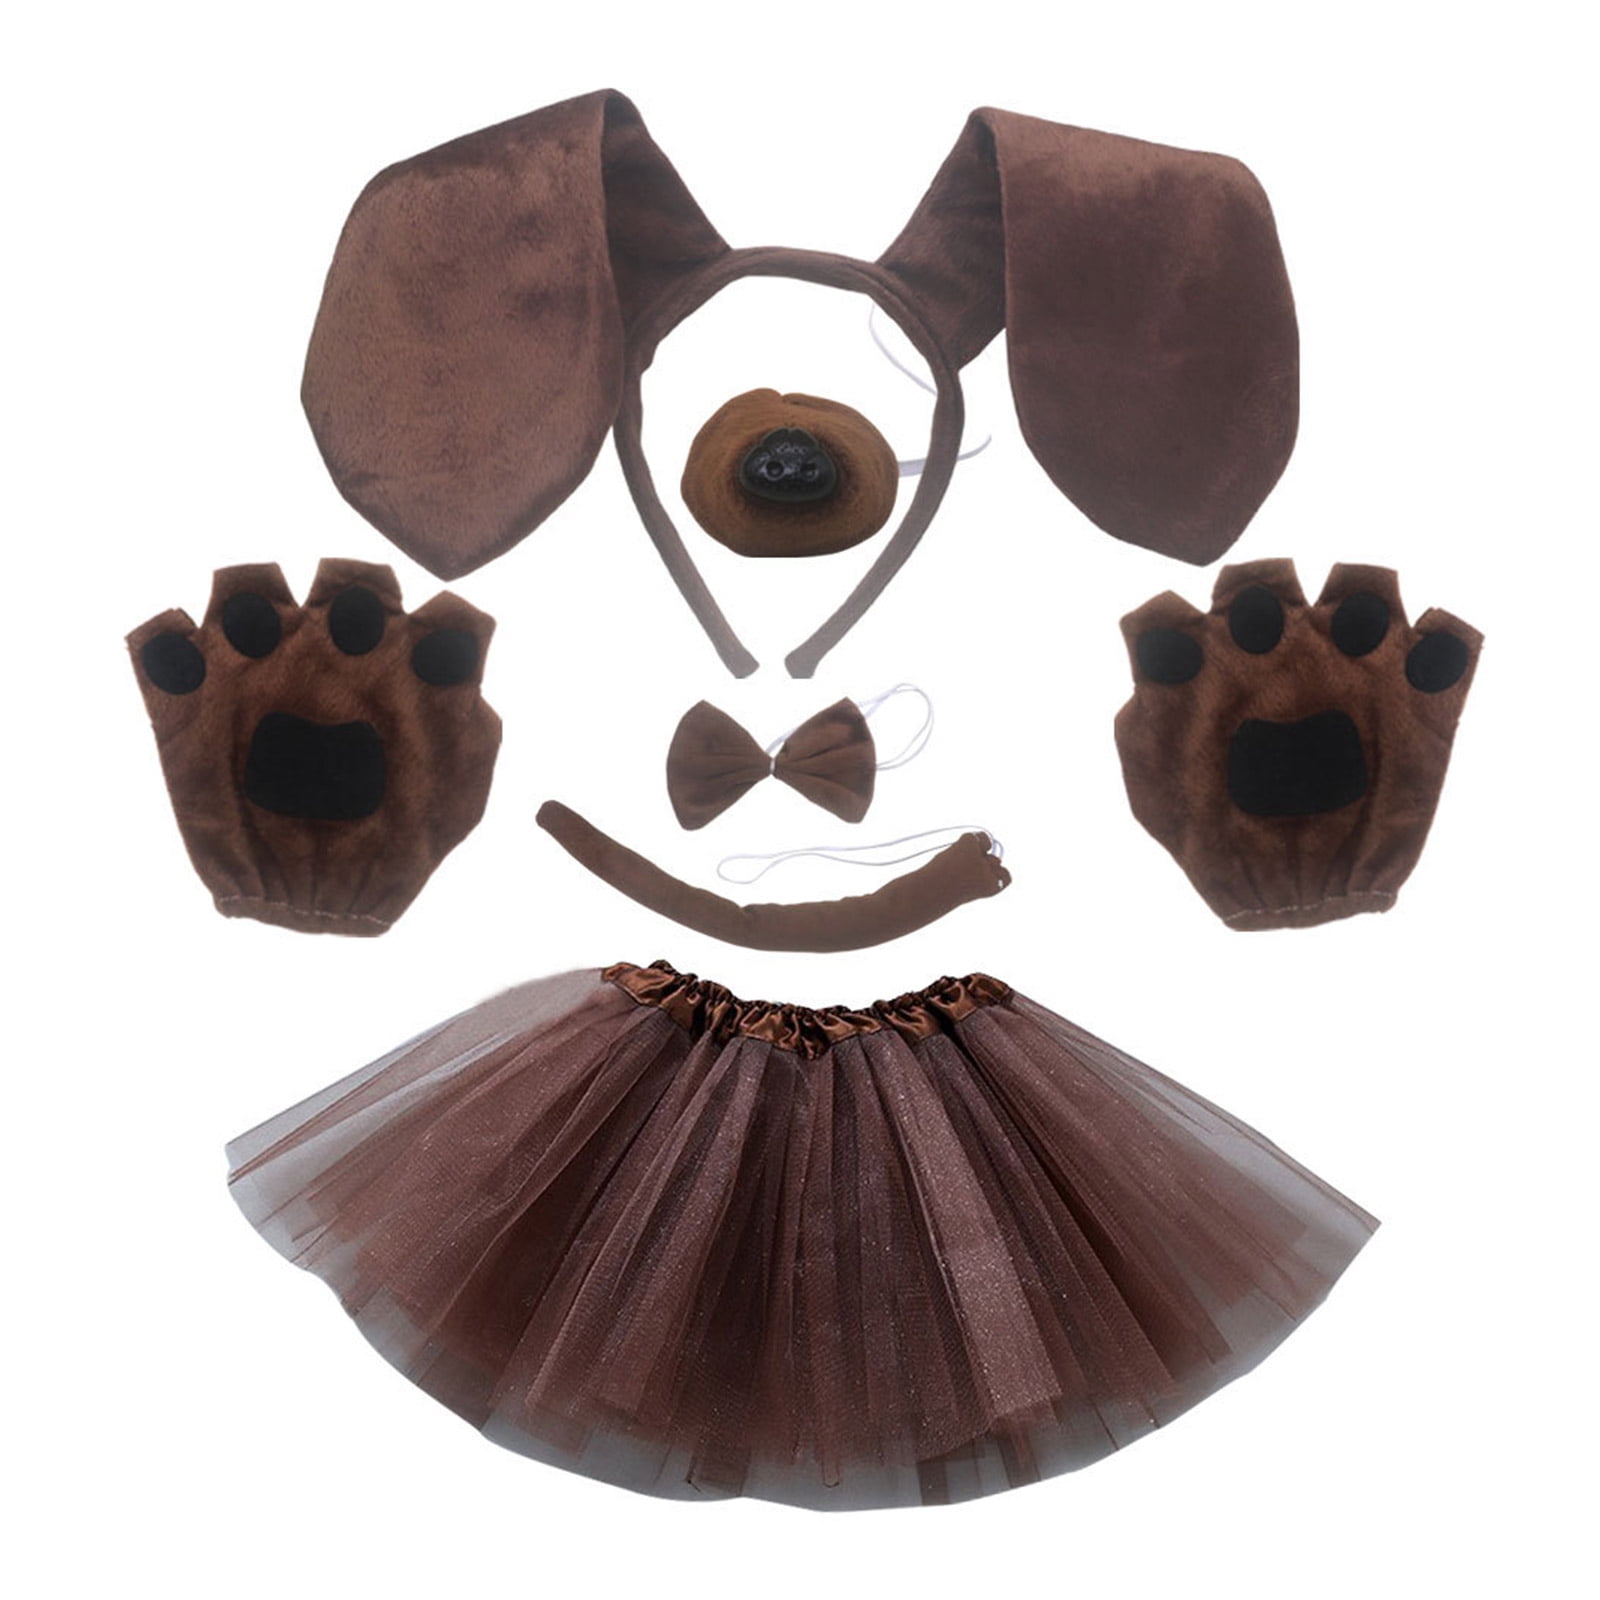 Dachshund Costume Set Dog Ears Headband Bowtie Tail Tutu Skirts Nose Gloves  for Kids Halloween Costume Cosplay Party 